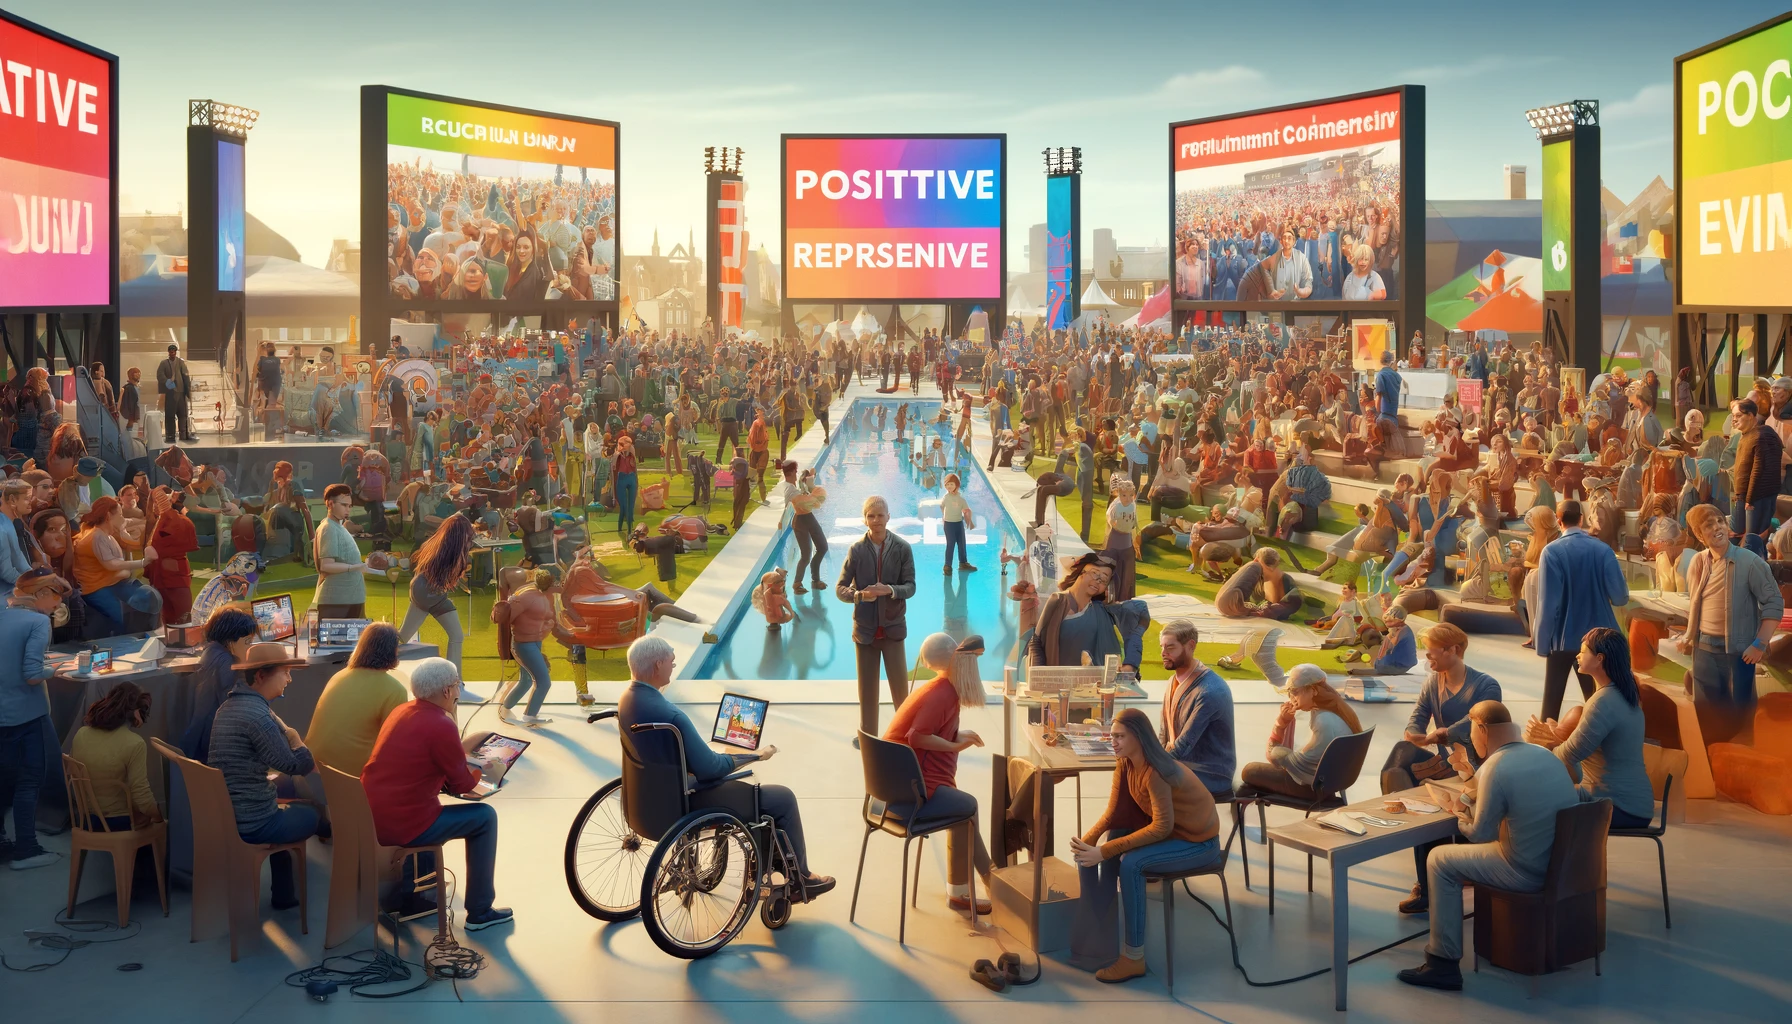 An image depicting positive representation in events and media. The scene is set at a large, inclusive public event, showing a diverse group of people of different ages, races, and abilities enjoying themselves. They are engaged in various activities such as listening to music, dancing, and interacting with technology. The setting includes colorful banners promoting equality and unity. In the background, large screens display positive news stories and images of unity and community support, reflecting a vibrant and inclusive society.